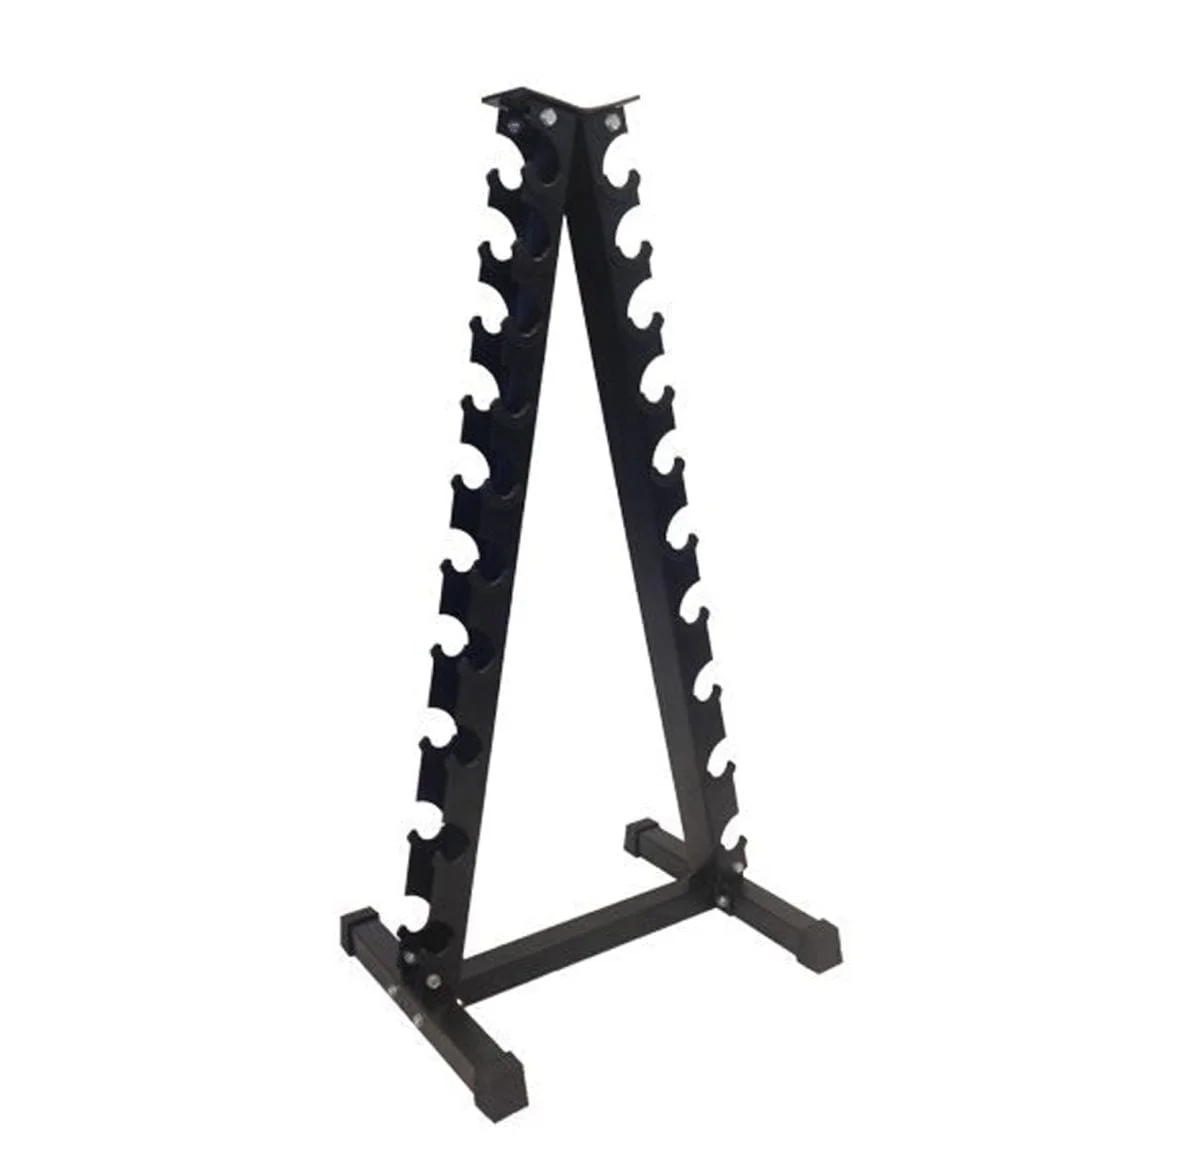 Ta Sports Vertical Dumbbell Rack 10 Pairs 54060105 &Lt;H1&Gt;Dumbbells Rack Stand&Lt;/H1&Gt; Vertical Dumbbell Rack Is Designed To Fit Your Weights Spic And Span. Prevent The Risk Of The Tripping Hazard And Get More Space In Your Gym Area By Stacking The Weights On The Rack That Comes With The Smallest Footprint! Plus, Transform Your Fitness Space Into An Organized Area! &Lt;Ul&Gt; &Lt;Li&Gt;Suitable For Rubber Hex Or Vinyl Dumbbells&Lt;/Li&Gt; &Lt;Li&Gt;Heavy Duty Box Steel Construction&Lt;/Li&Gt; &Lt;Li&Gt;Nylon Cradle Covers To Protect Dumbbells&Lt;/Li&Gt; &Lt;Li&Gt;Rubber Pad To Protect The Floor&Lt;/Li&Gt; &Lt;Li&Gt;Dark Grey Finish&Lt;/Li&Gt; &Lt;/Ul&Gt; Dumbbells Rack Stand Dumbbells Rack Stand